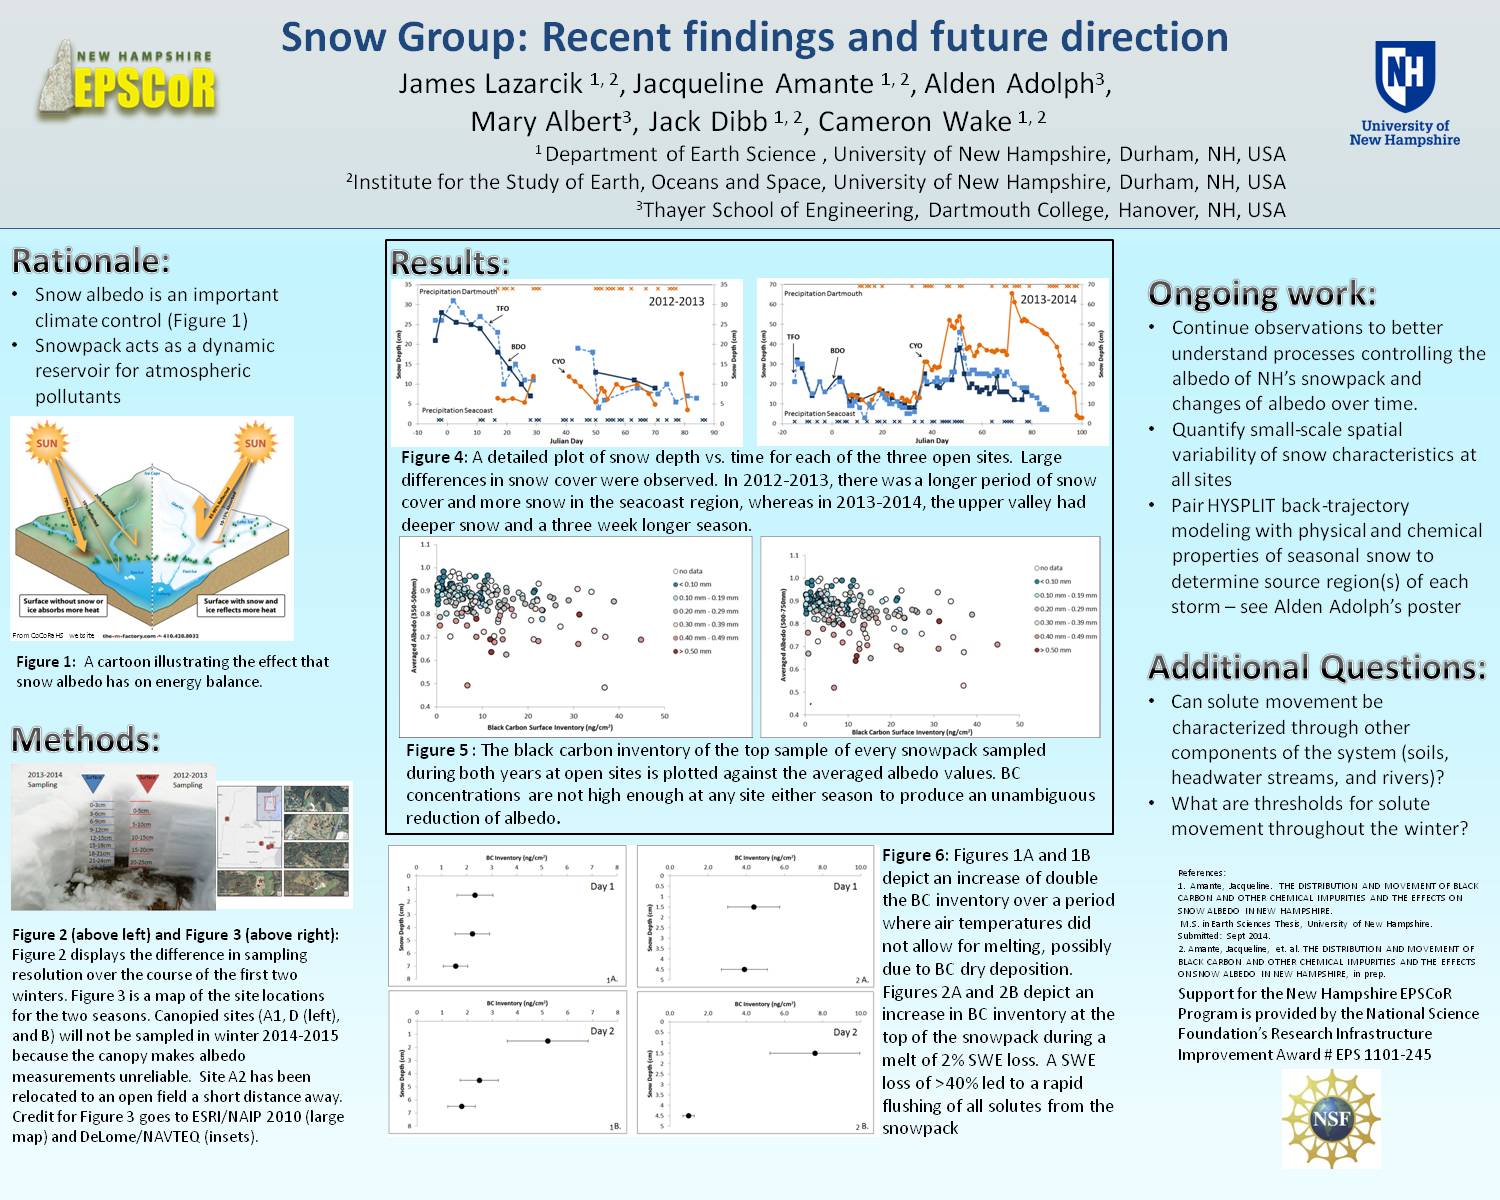 Snow Group: Recent Findings And Future Direction by jl2022